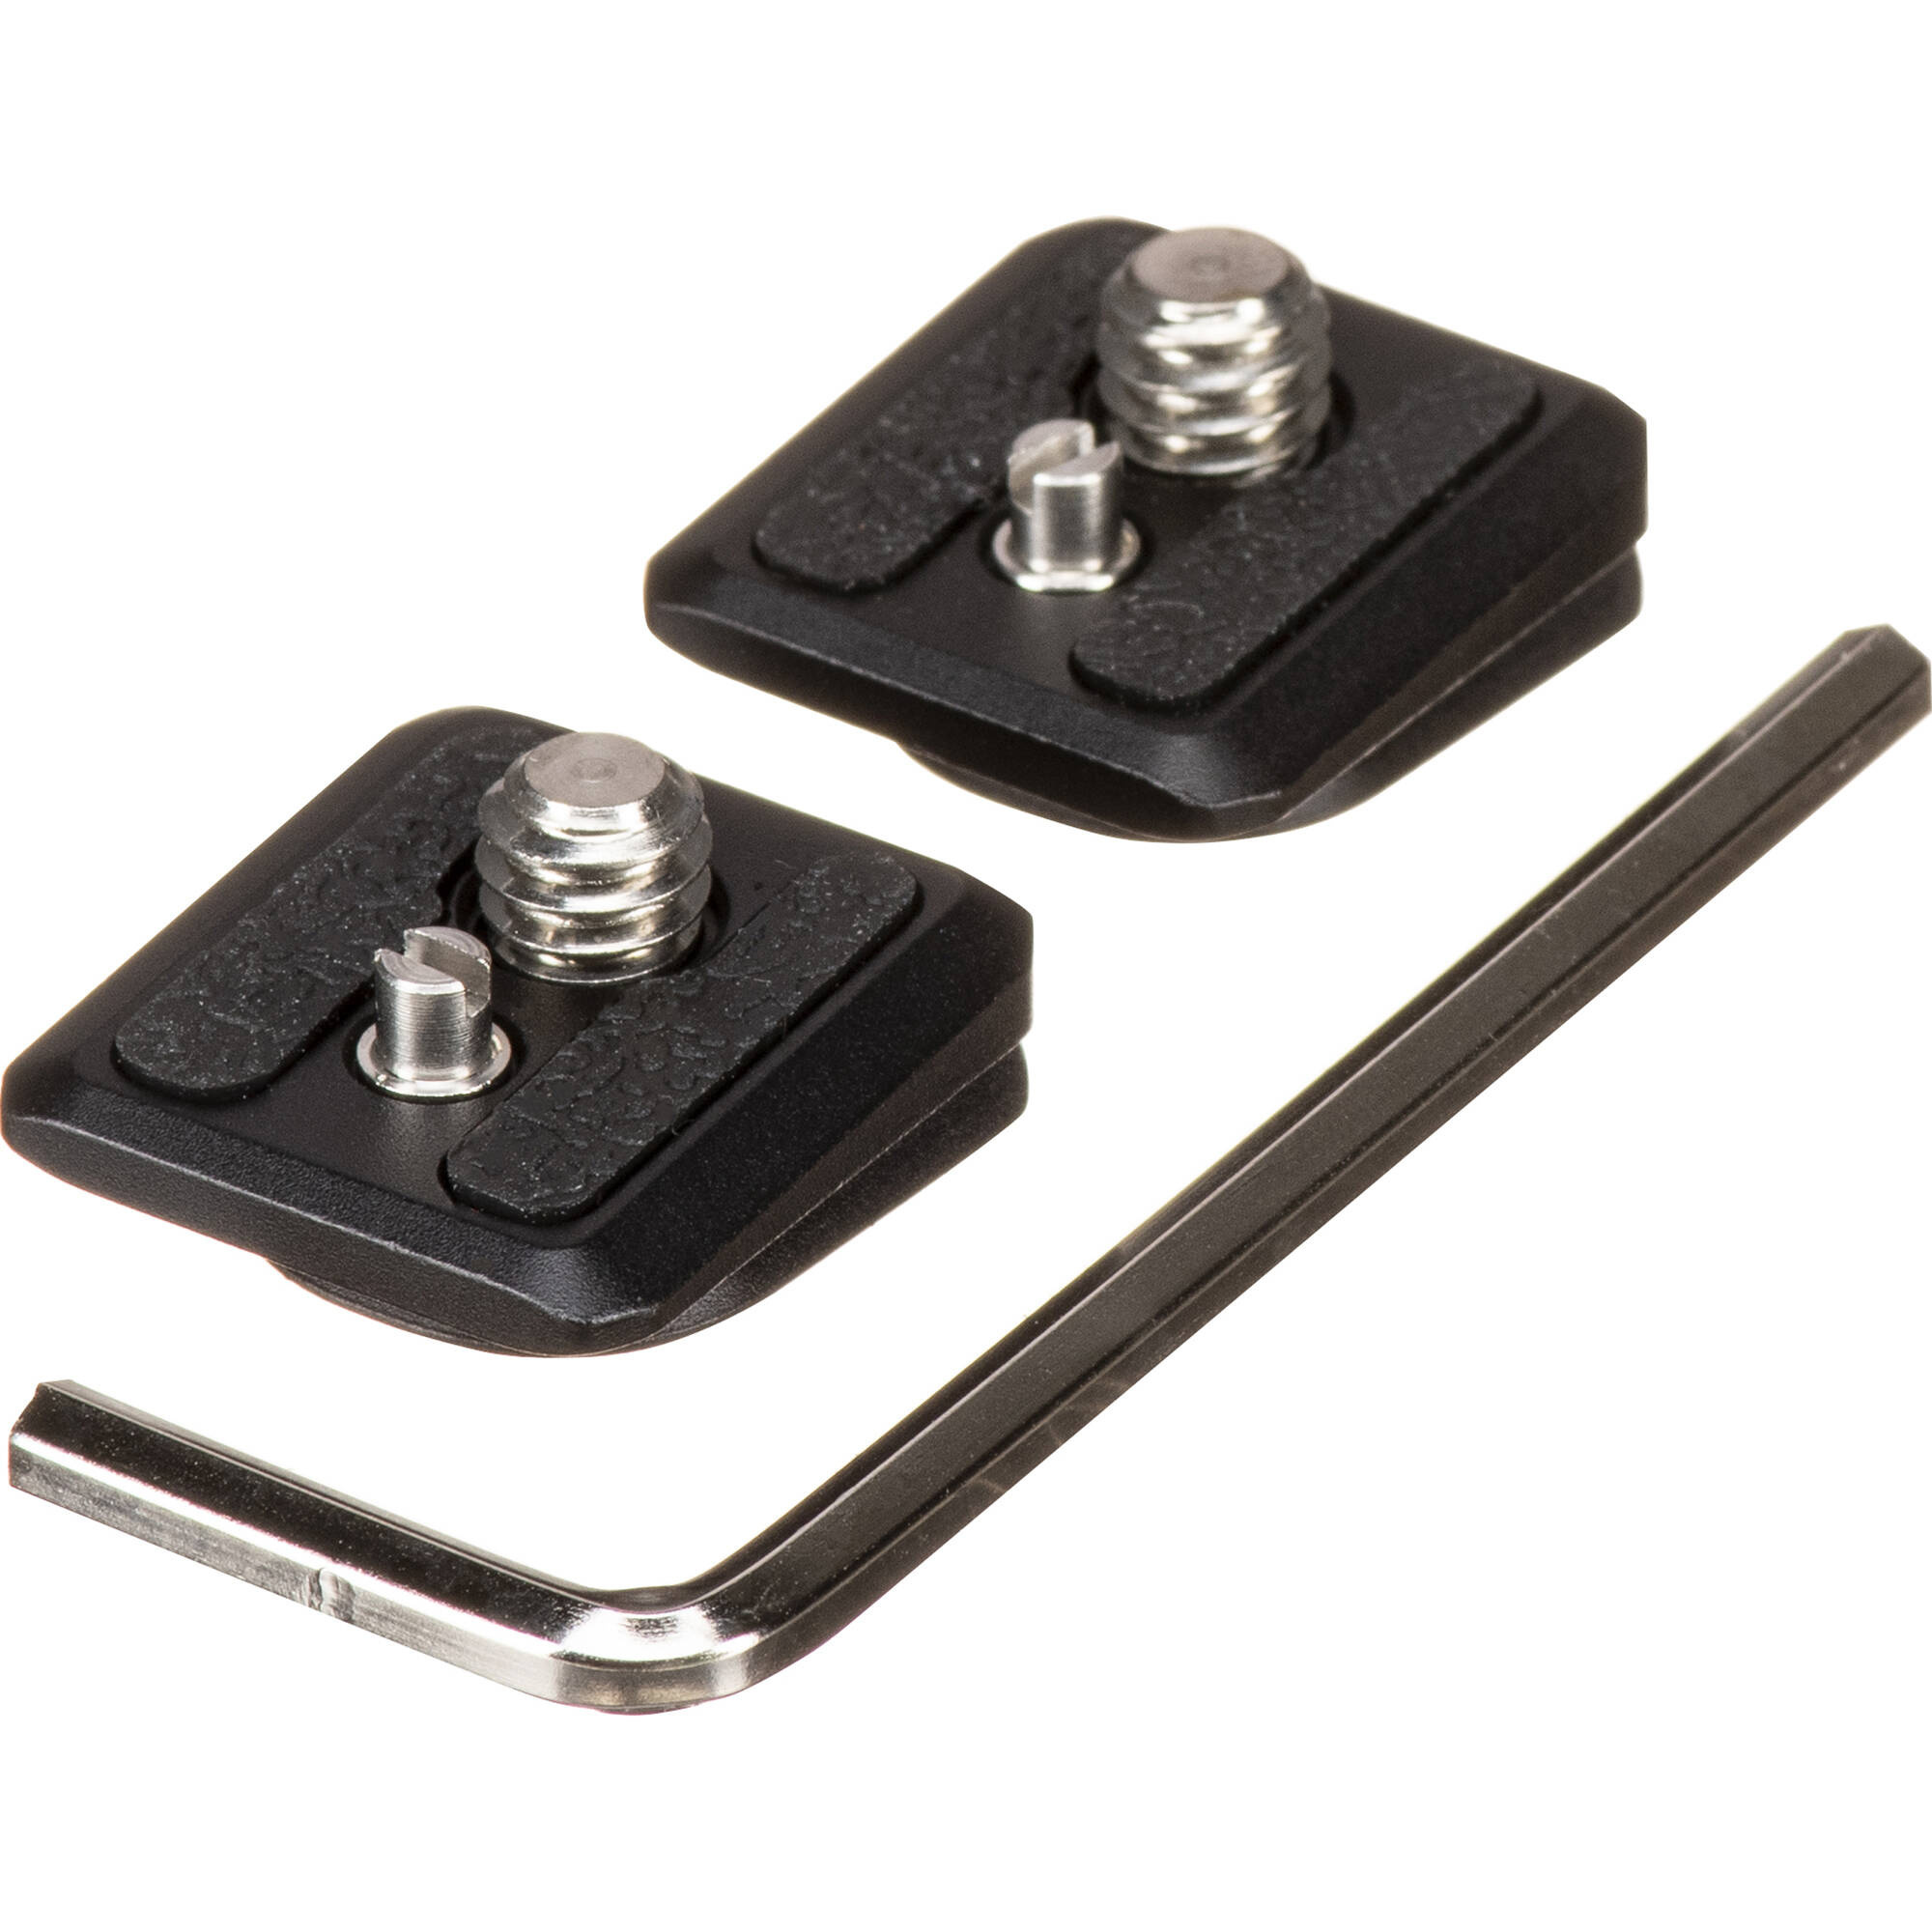 ANDYCINE R50-0 Mini Quick Release Plate with 1/4-20 Screw (2 Pieces)